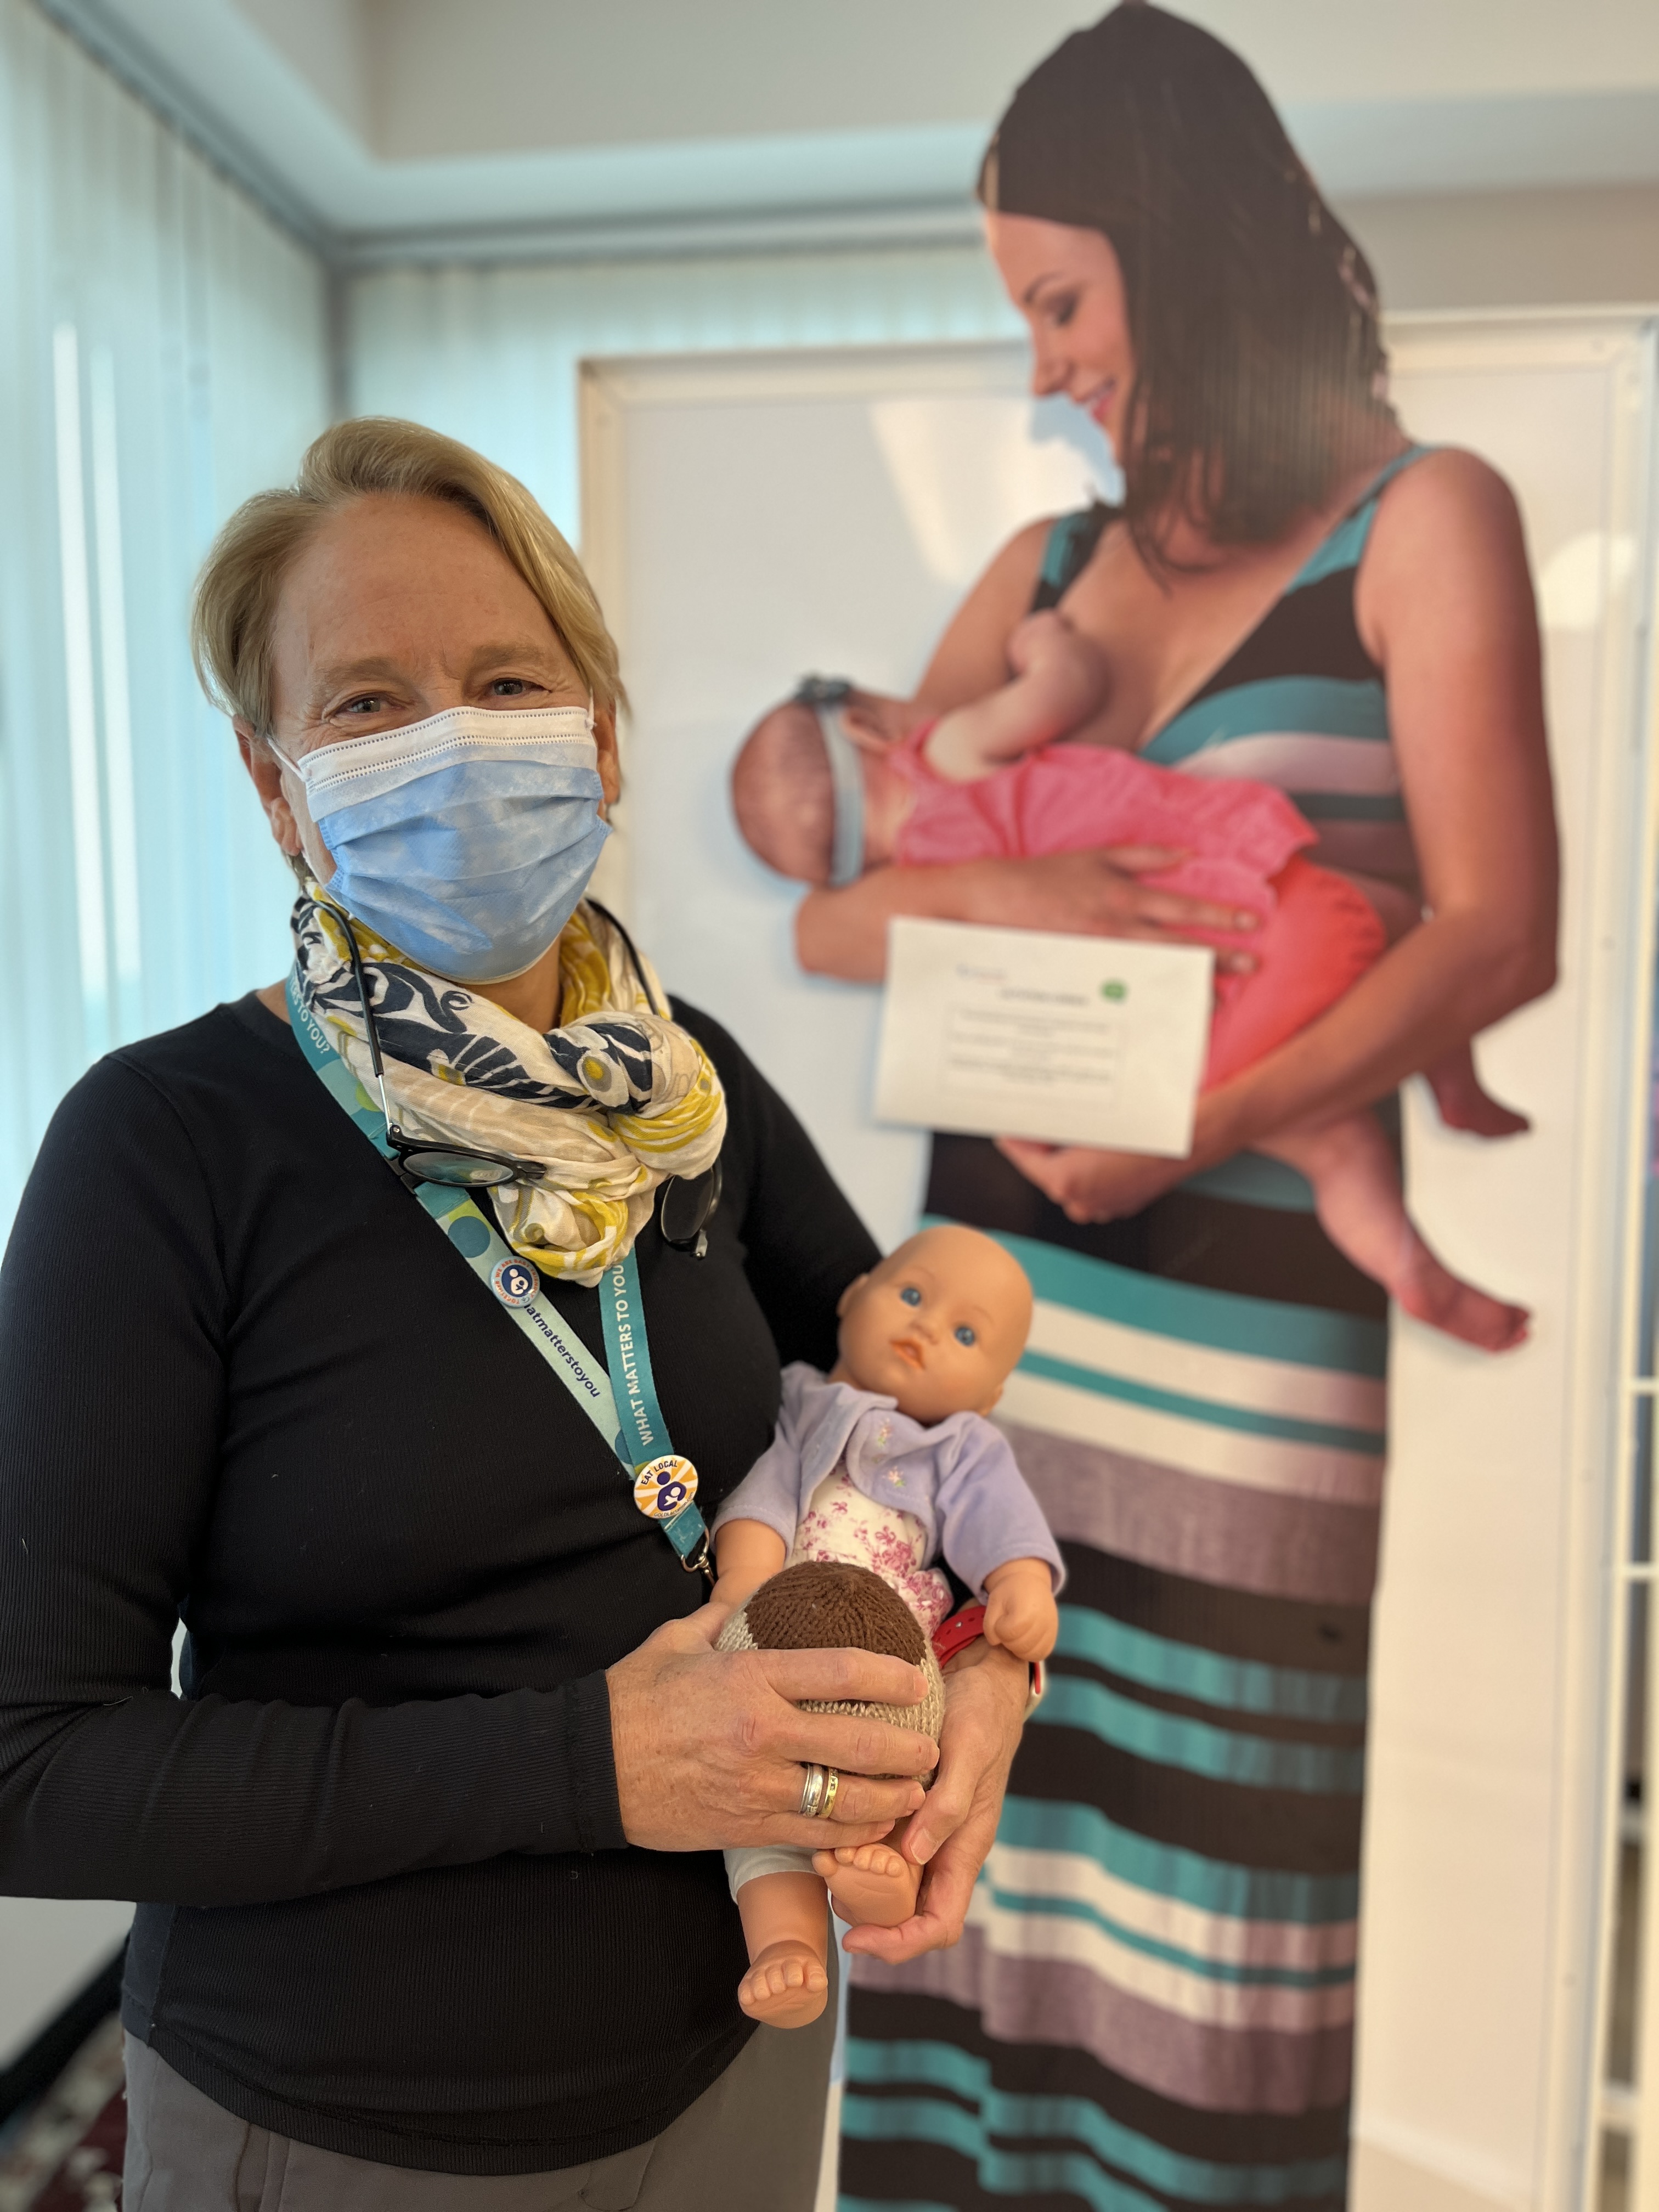 A person with short blonde hair wearing a black sweater, yellow scarf and a lanyard holds a baby doll in front of a poster display on breastfeeding